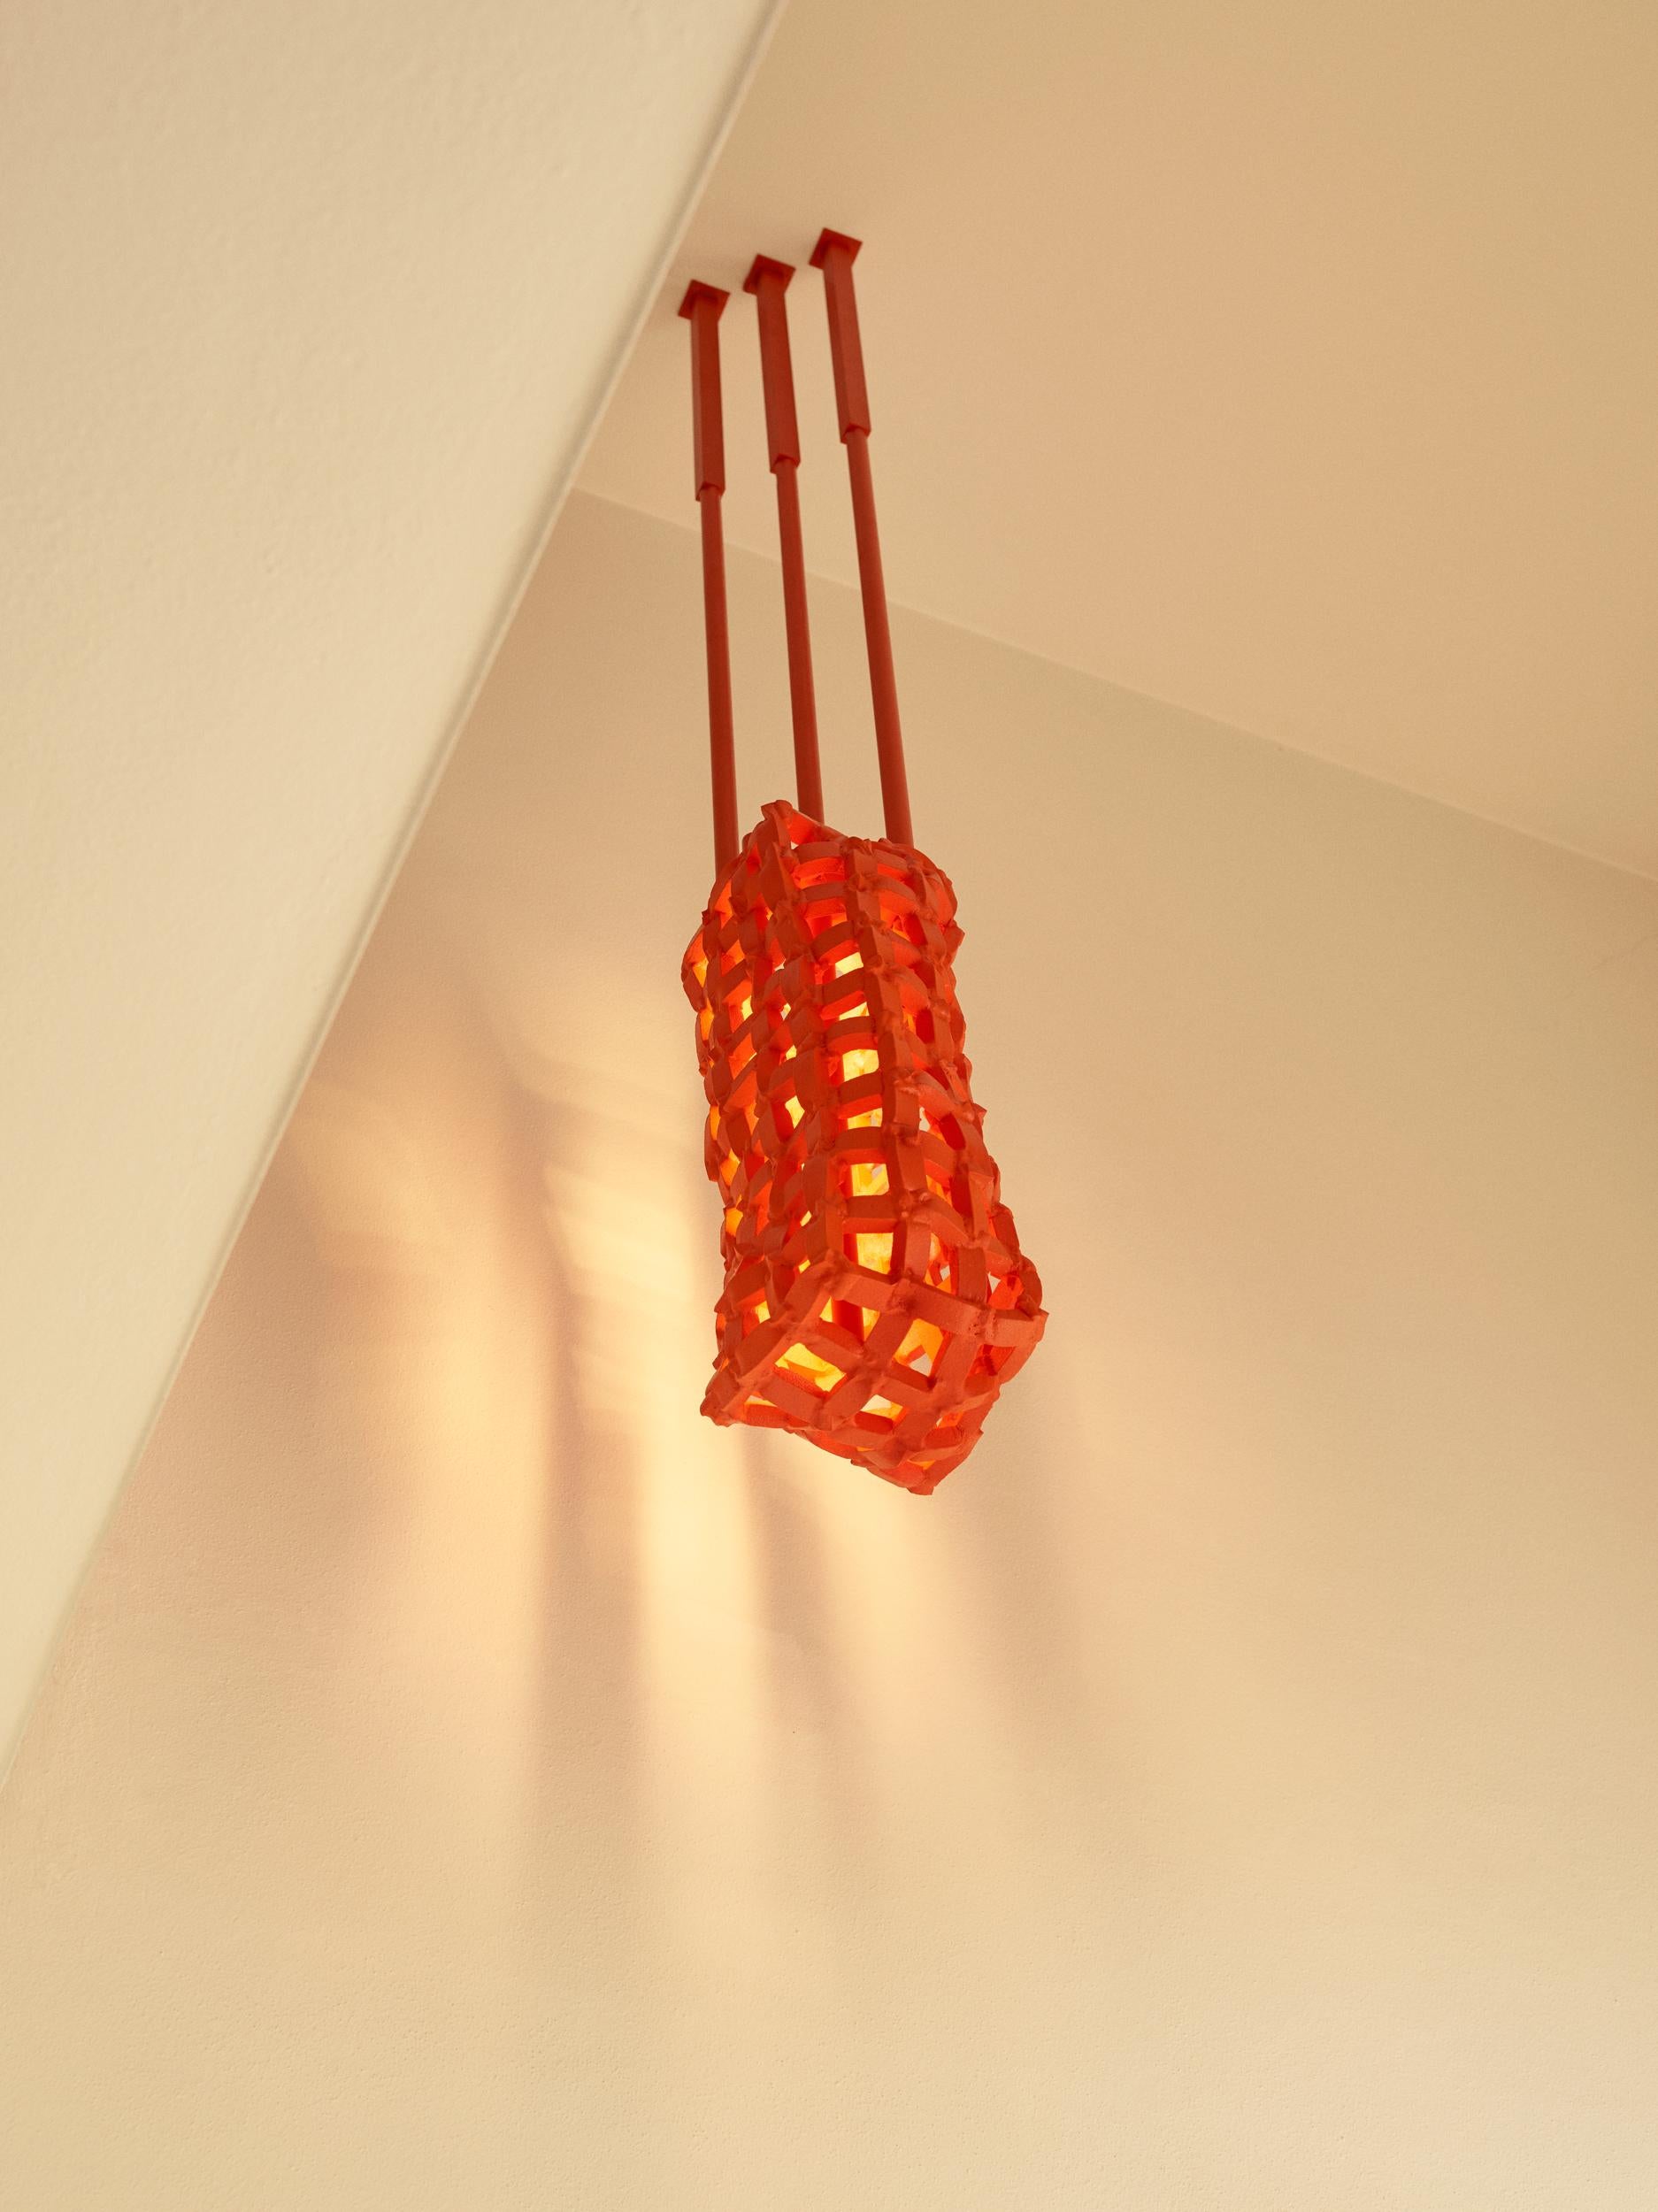 Foam Catcher_Ceiling Light_2 is Presented by Anton Hendrik Denys

The Foam Catcher_Ceiling Light_2 is a vertical hanging ceiling lamp made out of a rubber-coated foam lampshade that’s being supported by two metal hanging bars at opposite corners of